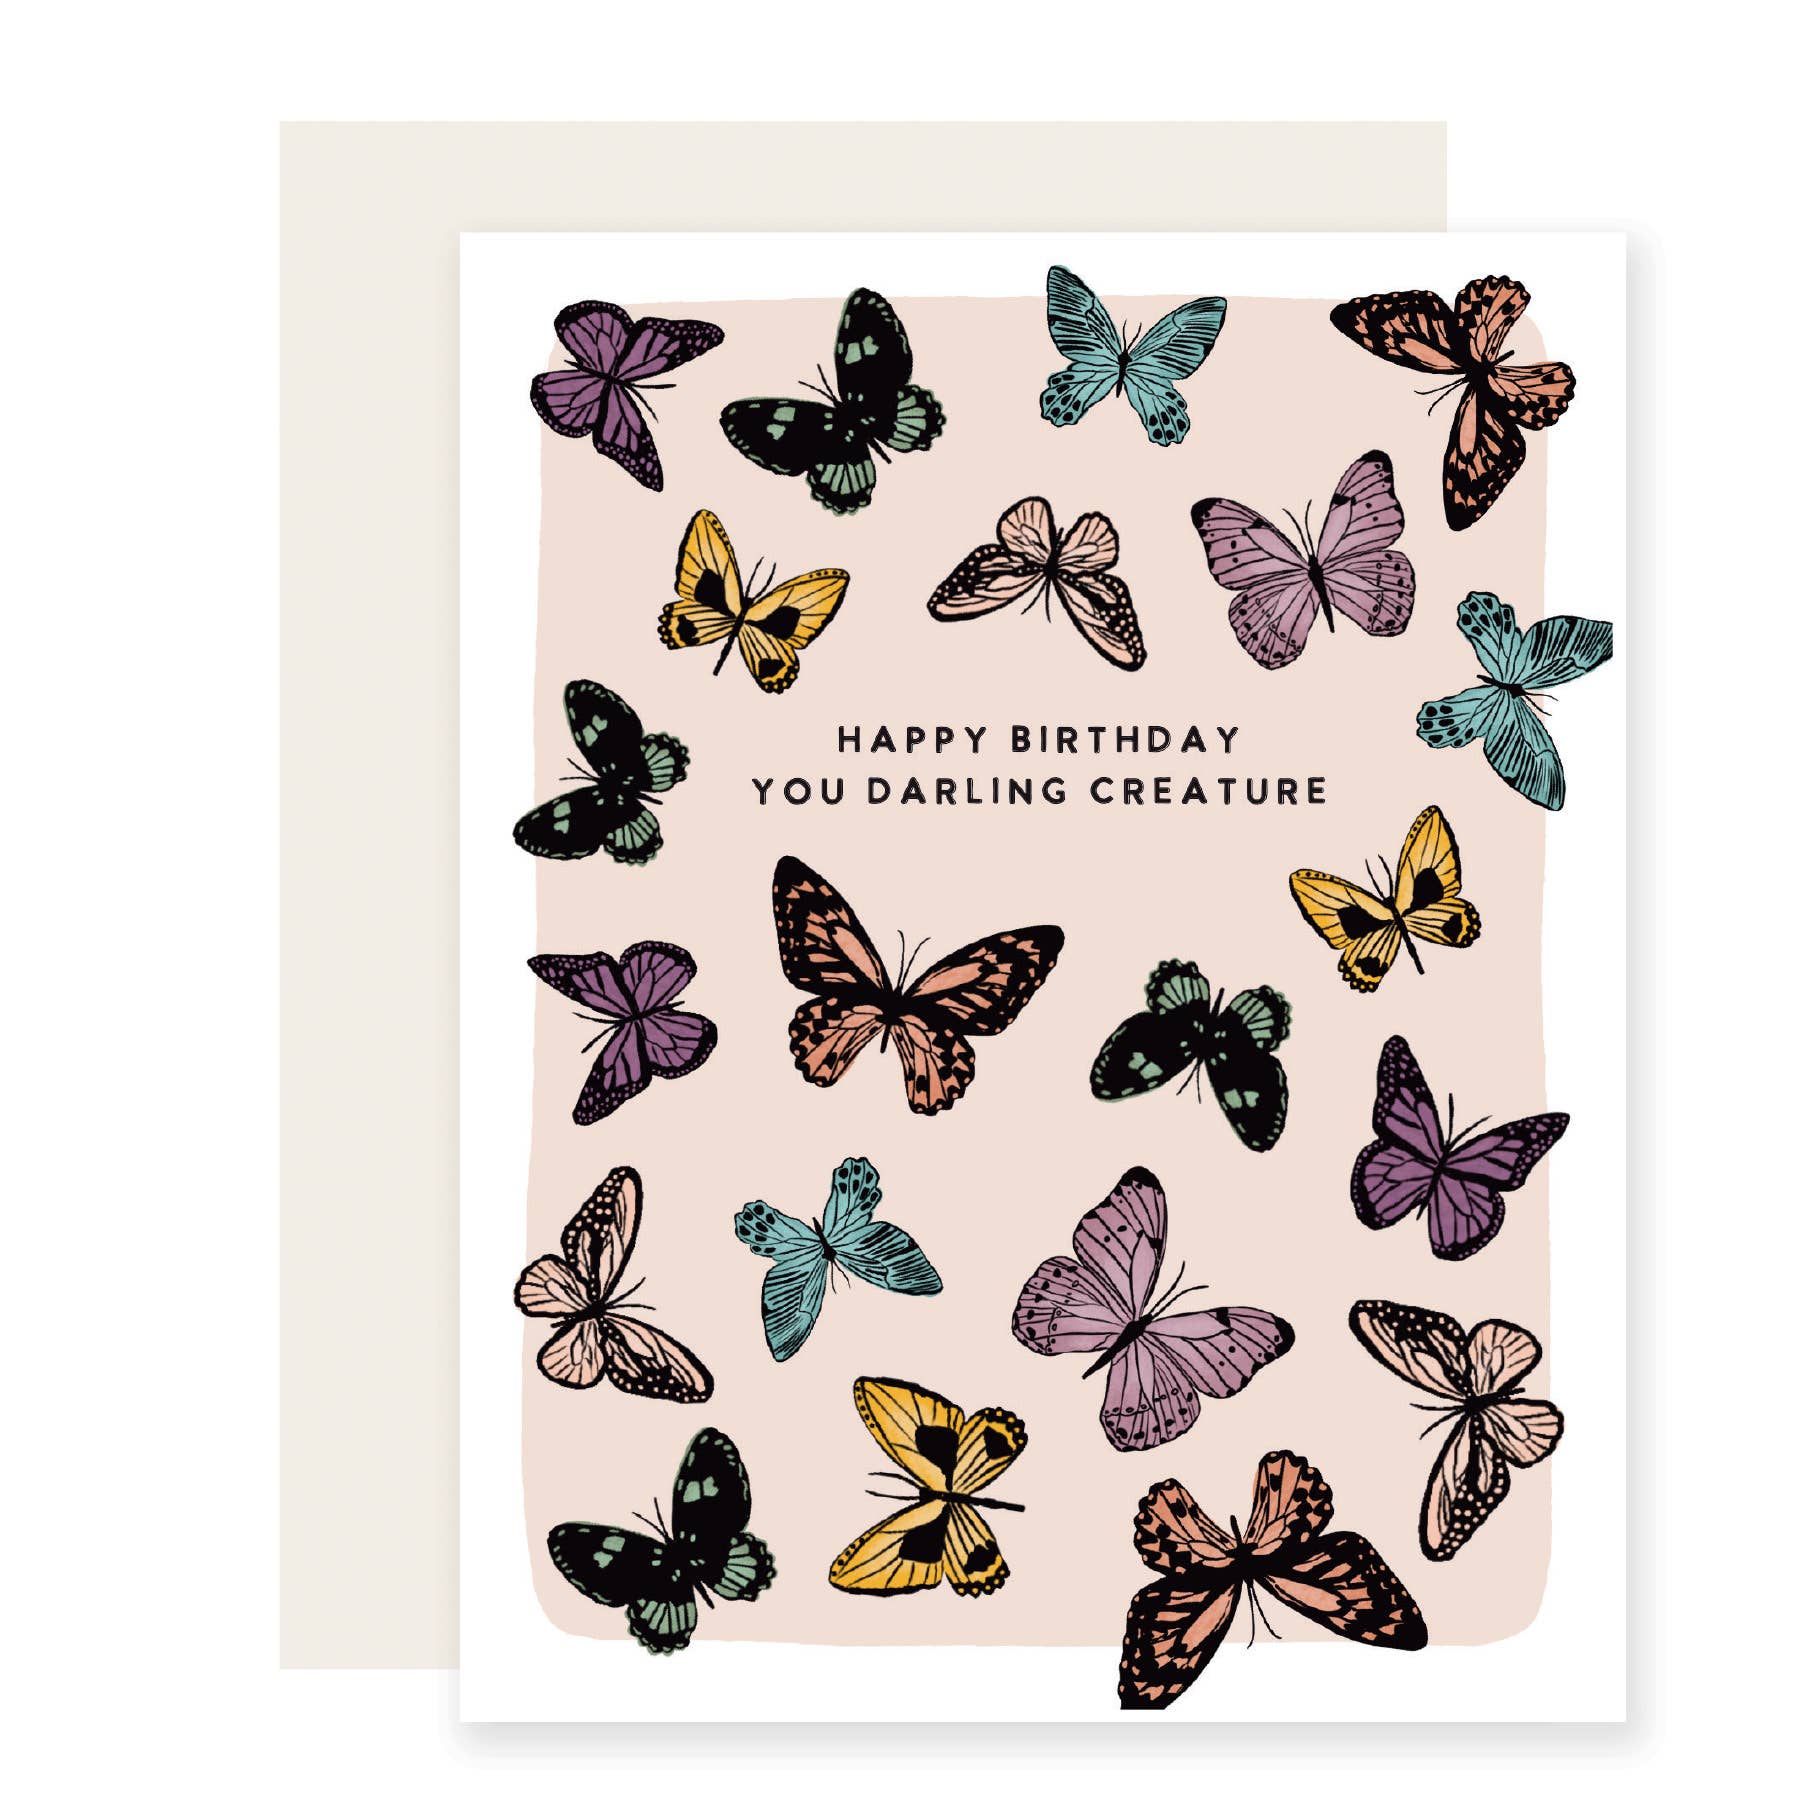 Darling Creature | Beautiful Birthday Card | Butterfly Card